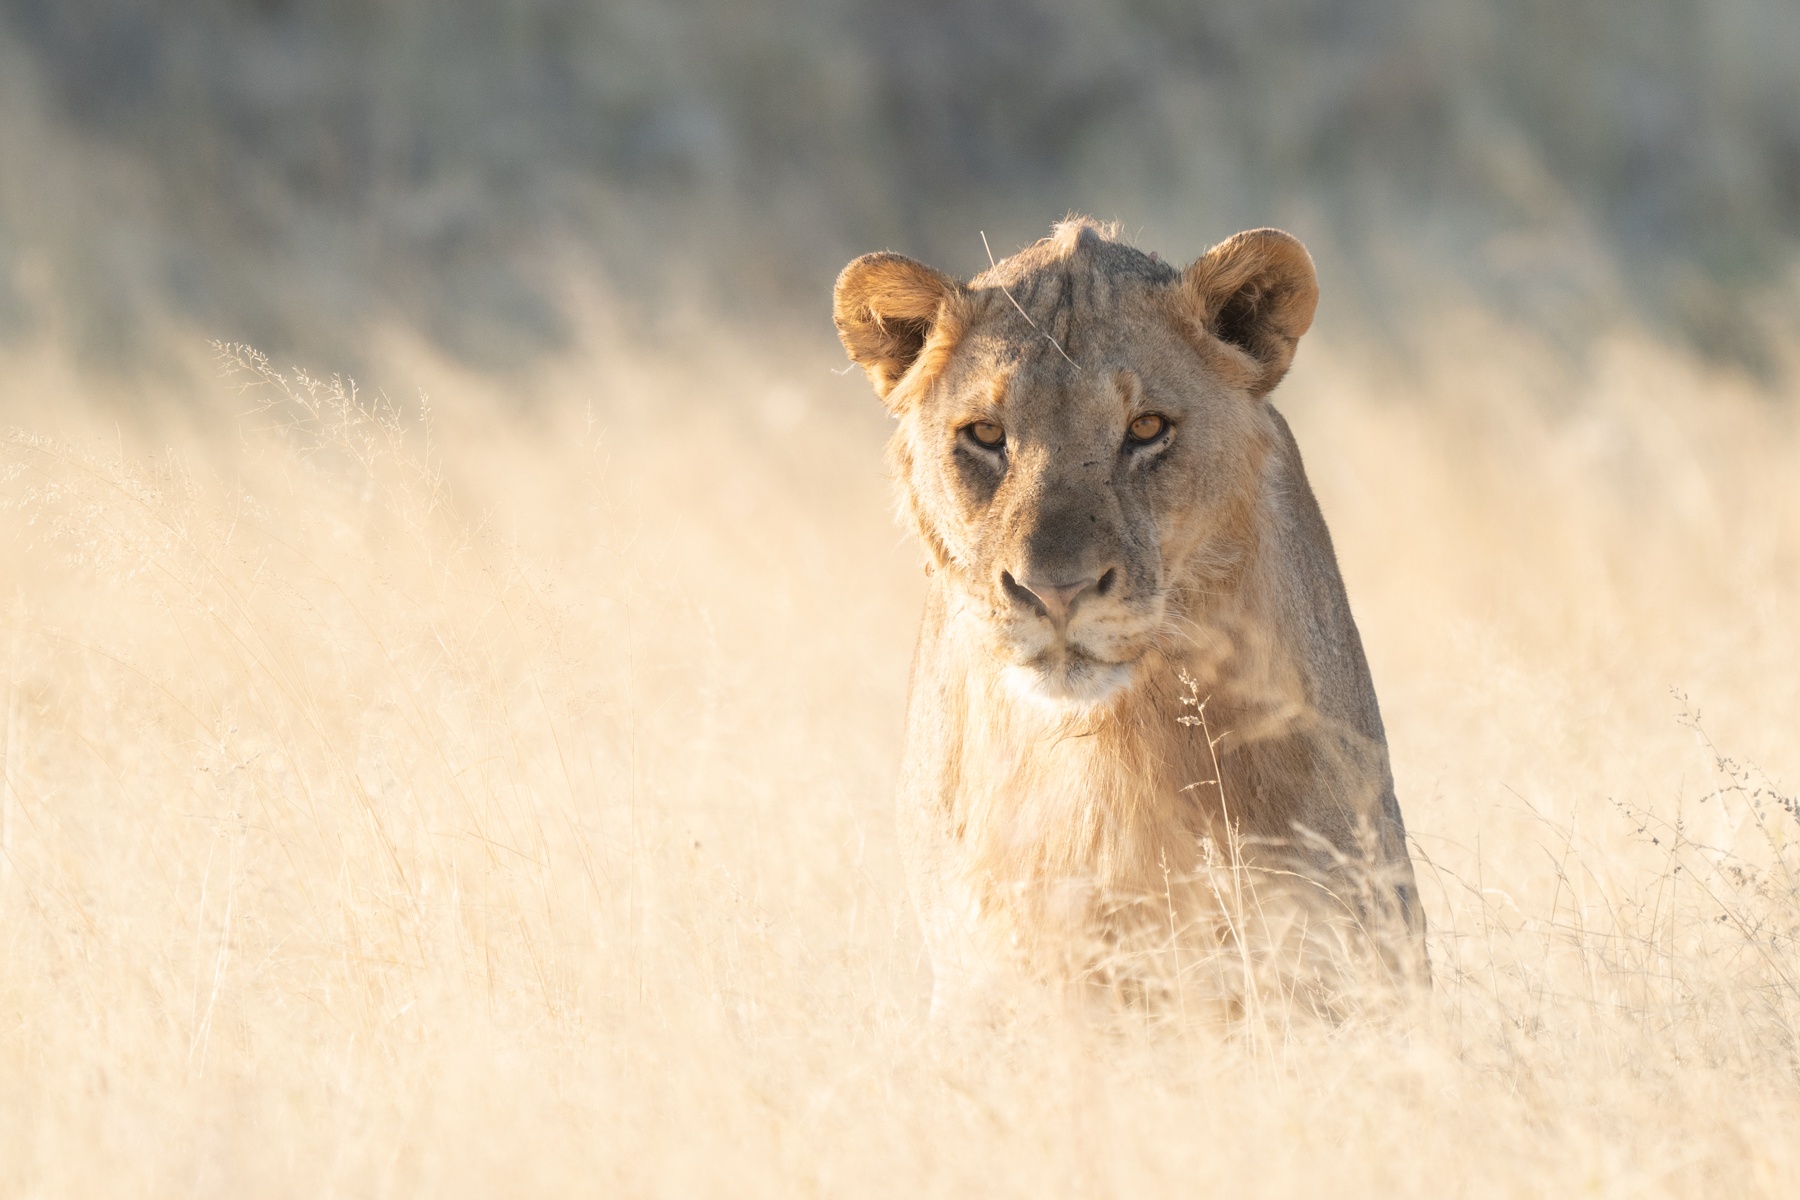 A sleepy Etosha lioness wakes up and goes to hunt during our Namibia wildlife photography tour